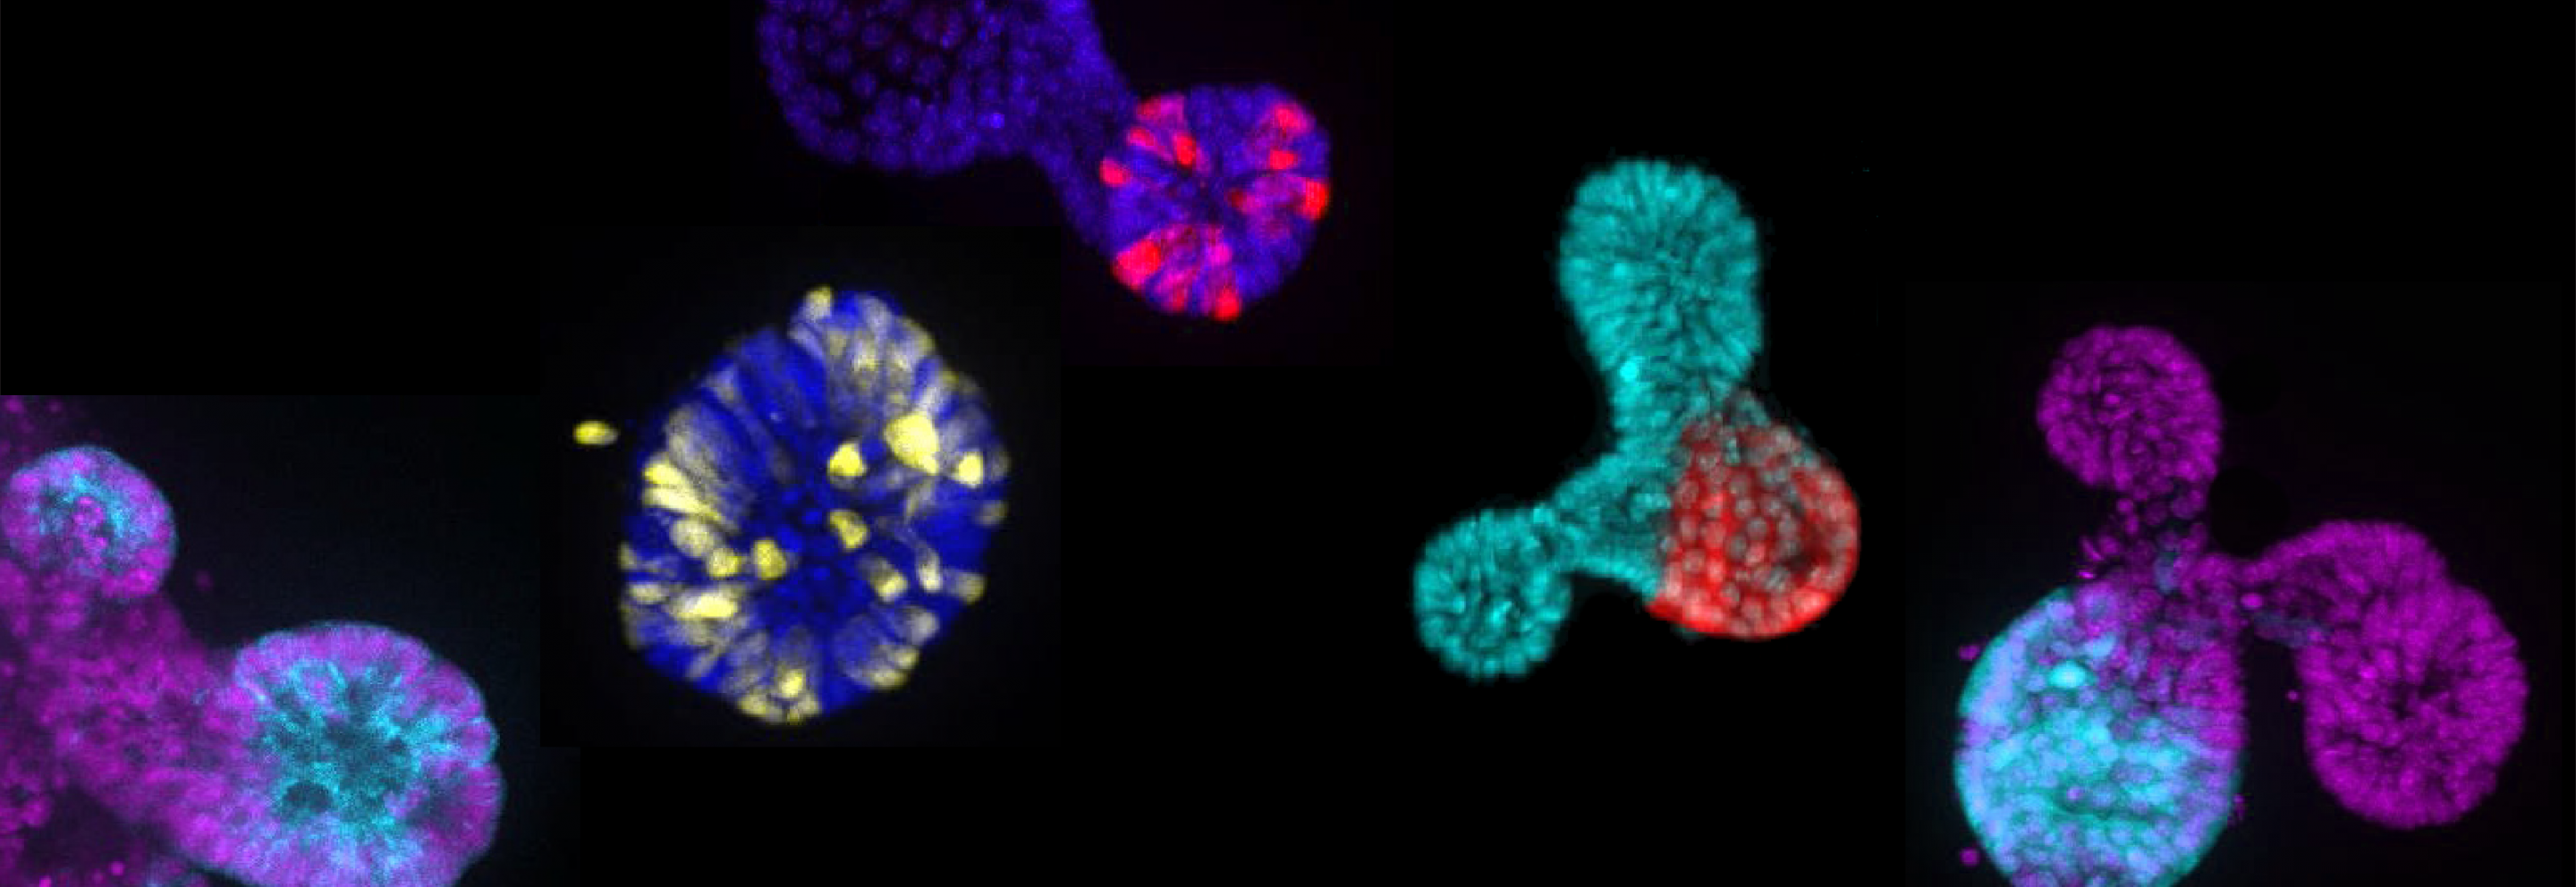 Microscopy images of cells